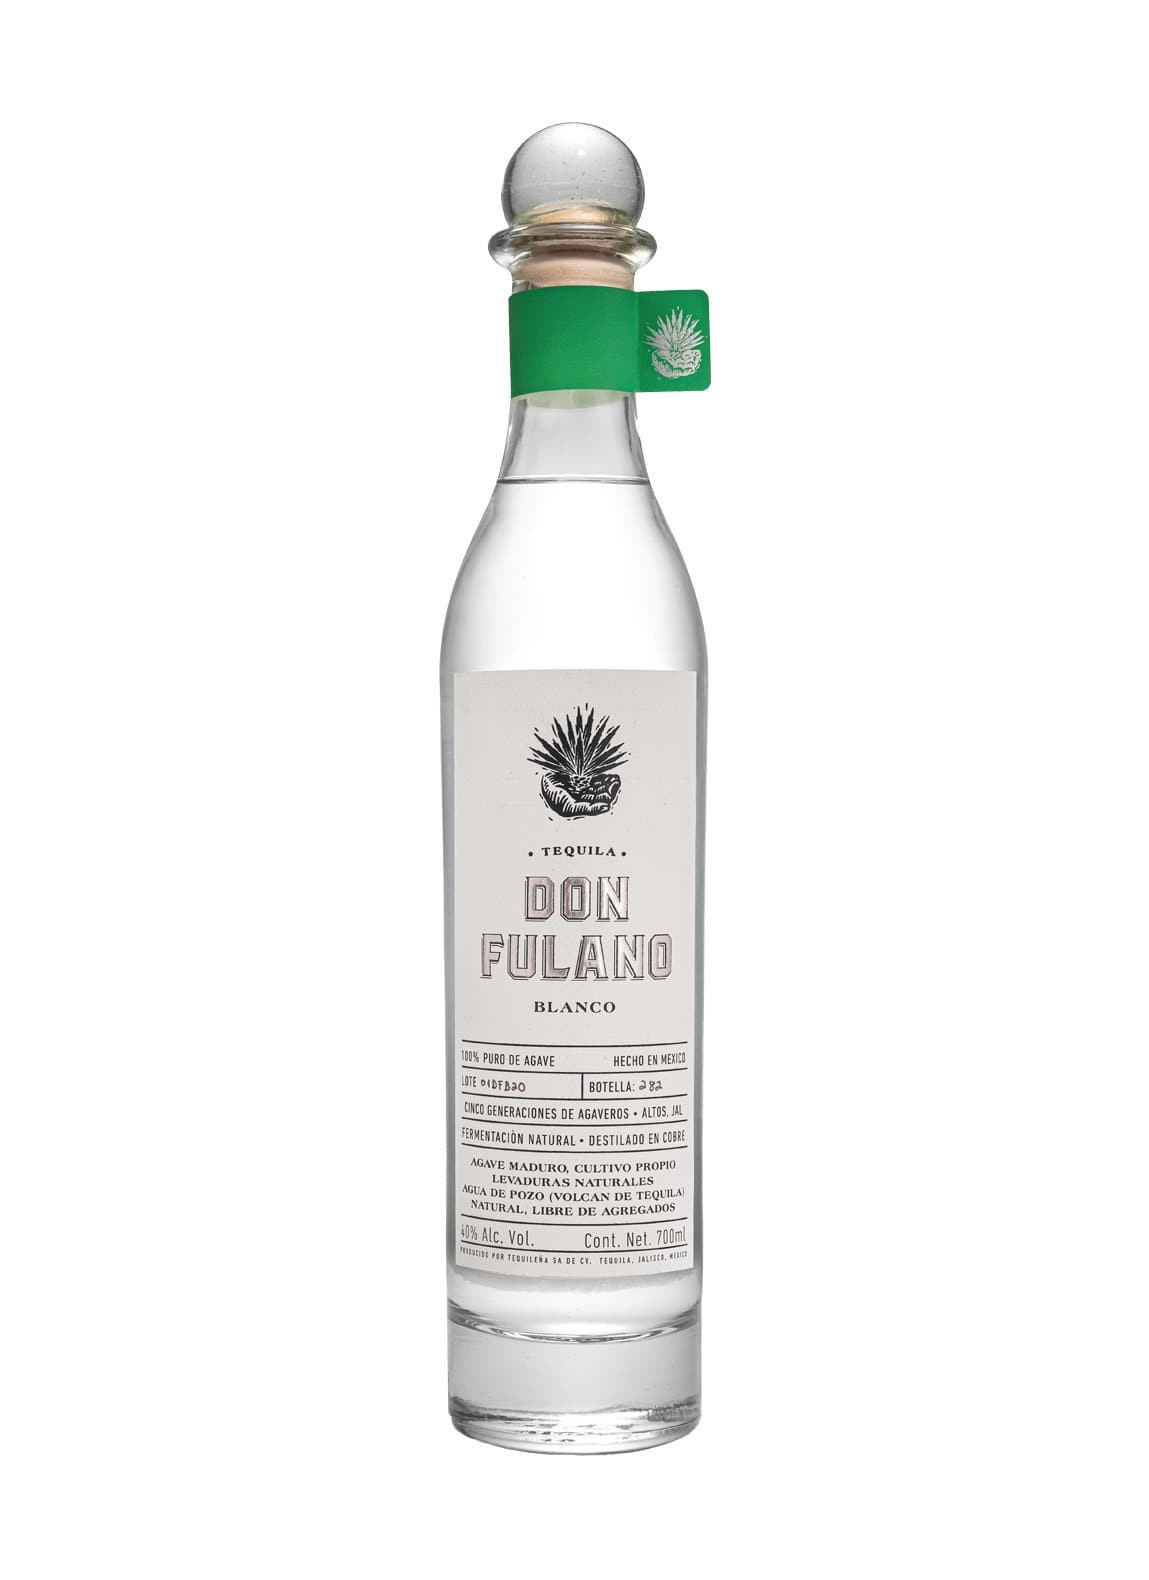 Don Fulano Blanco Tequila 40% 700ml | Tequila | Shop online at Spirits of France